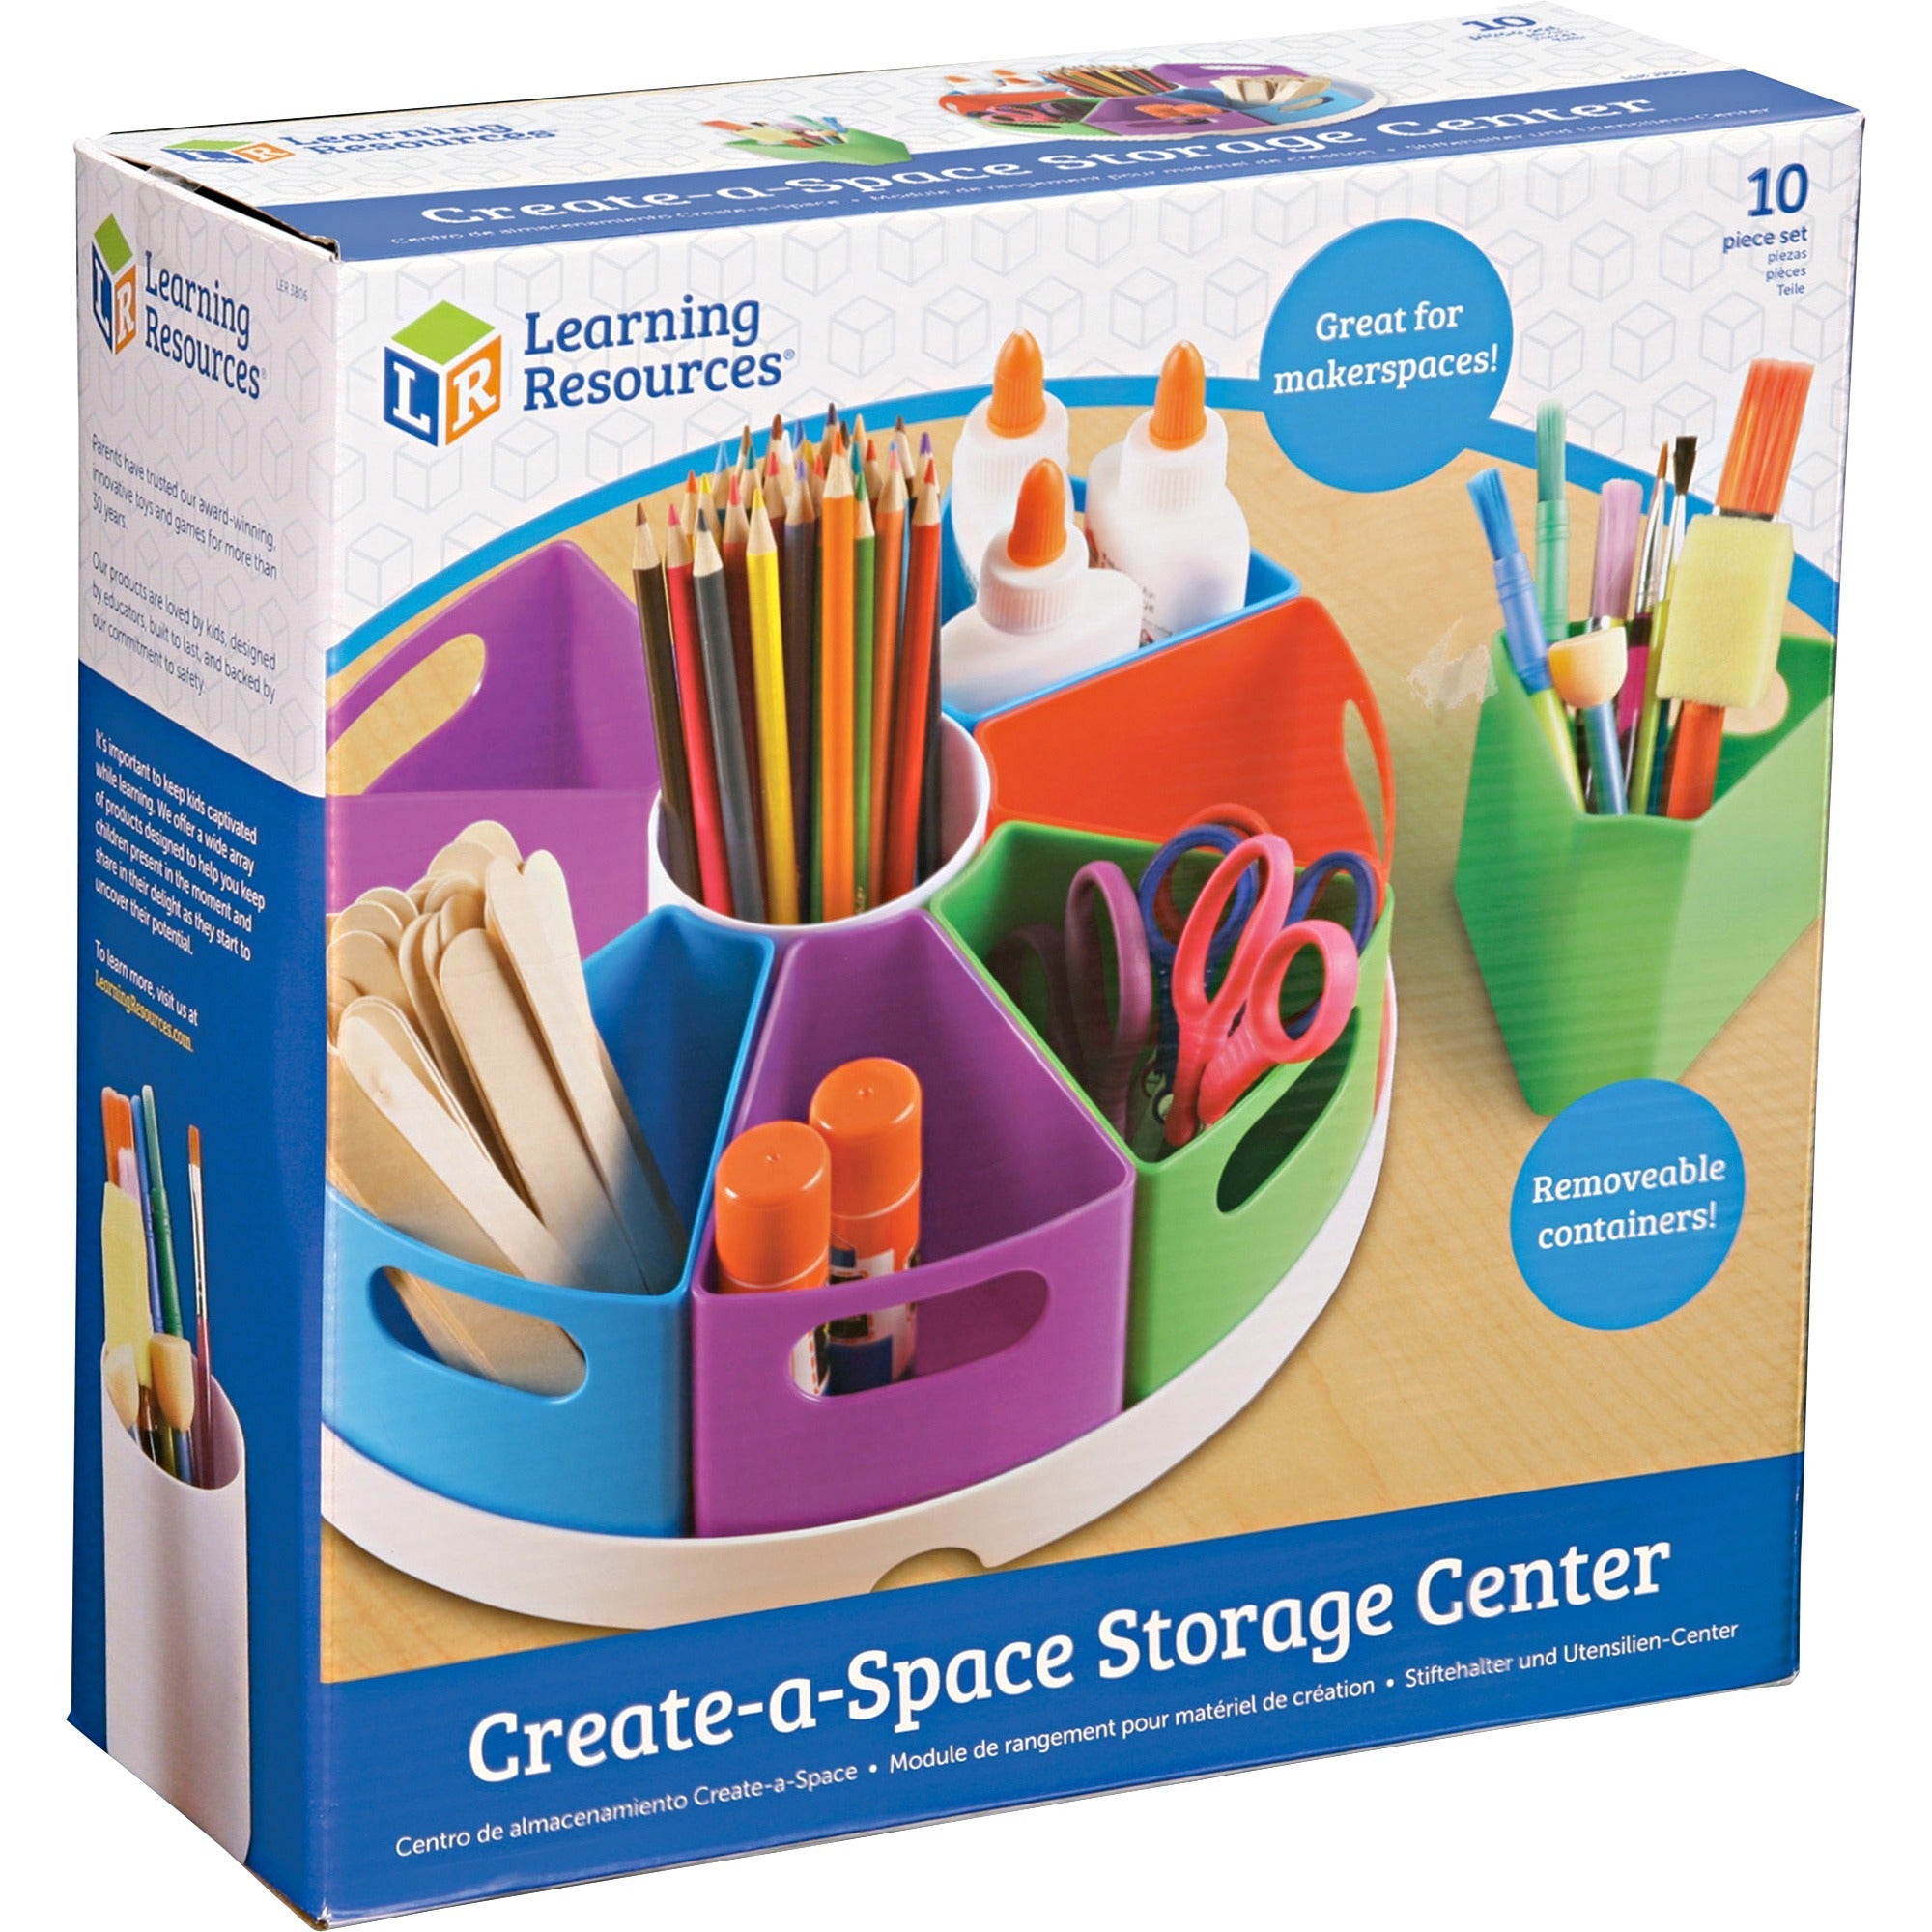 learning-resources-10-piece-storage-center-46-height-x-12-width-x-12-length-multi-1-each_lrnler3806 - 1